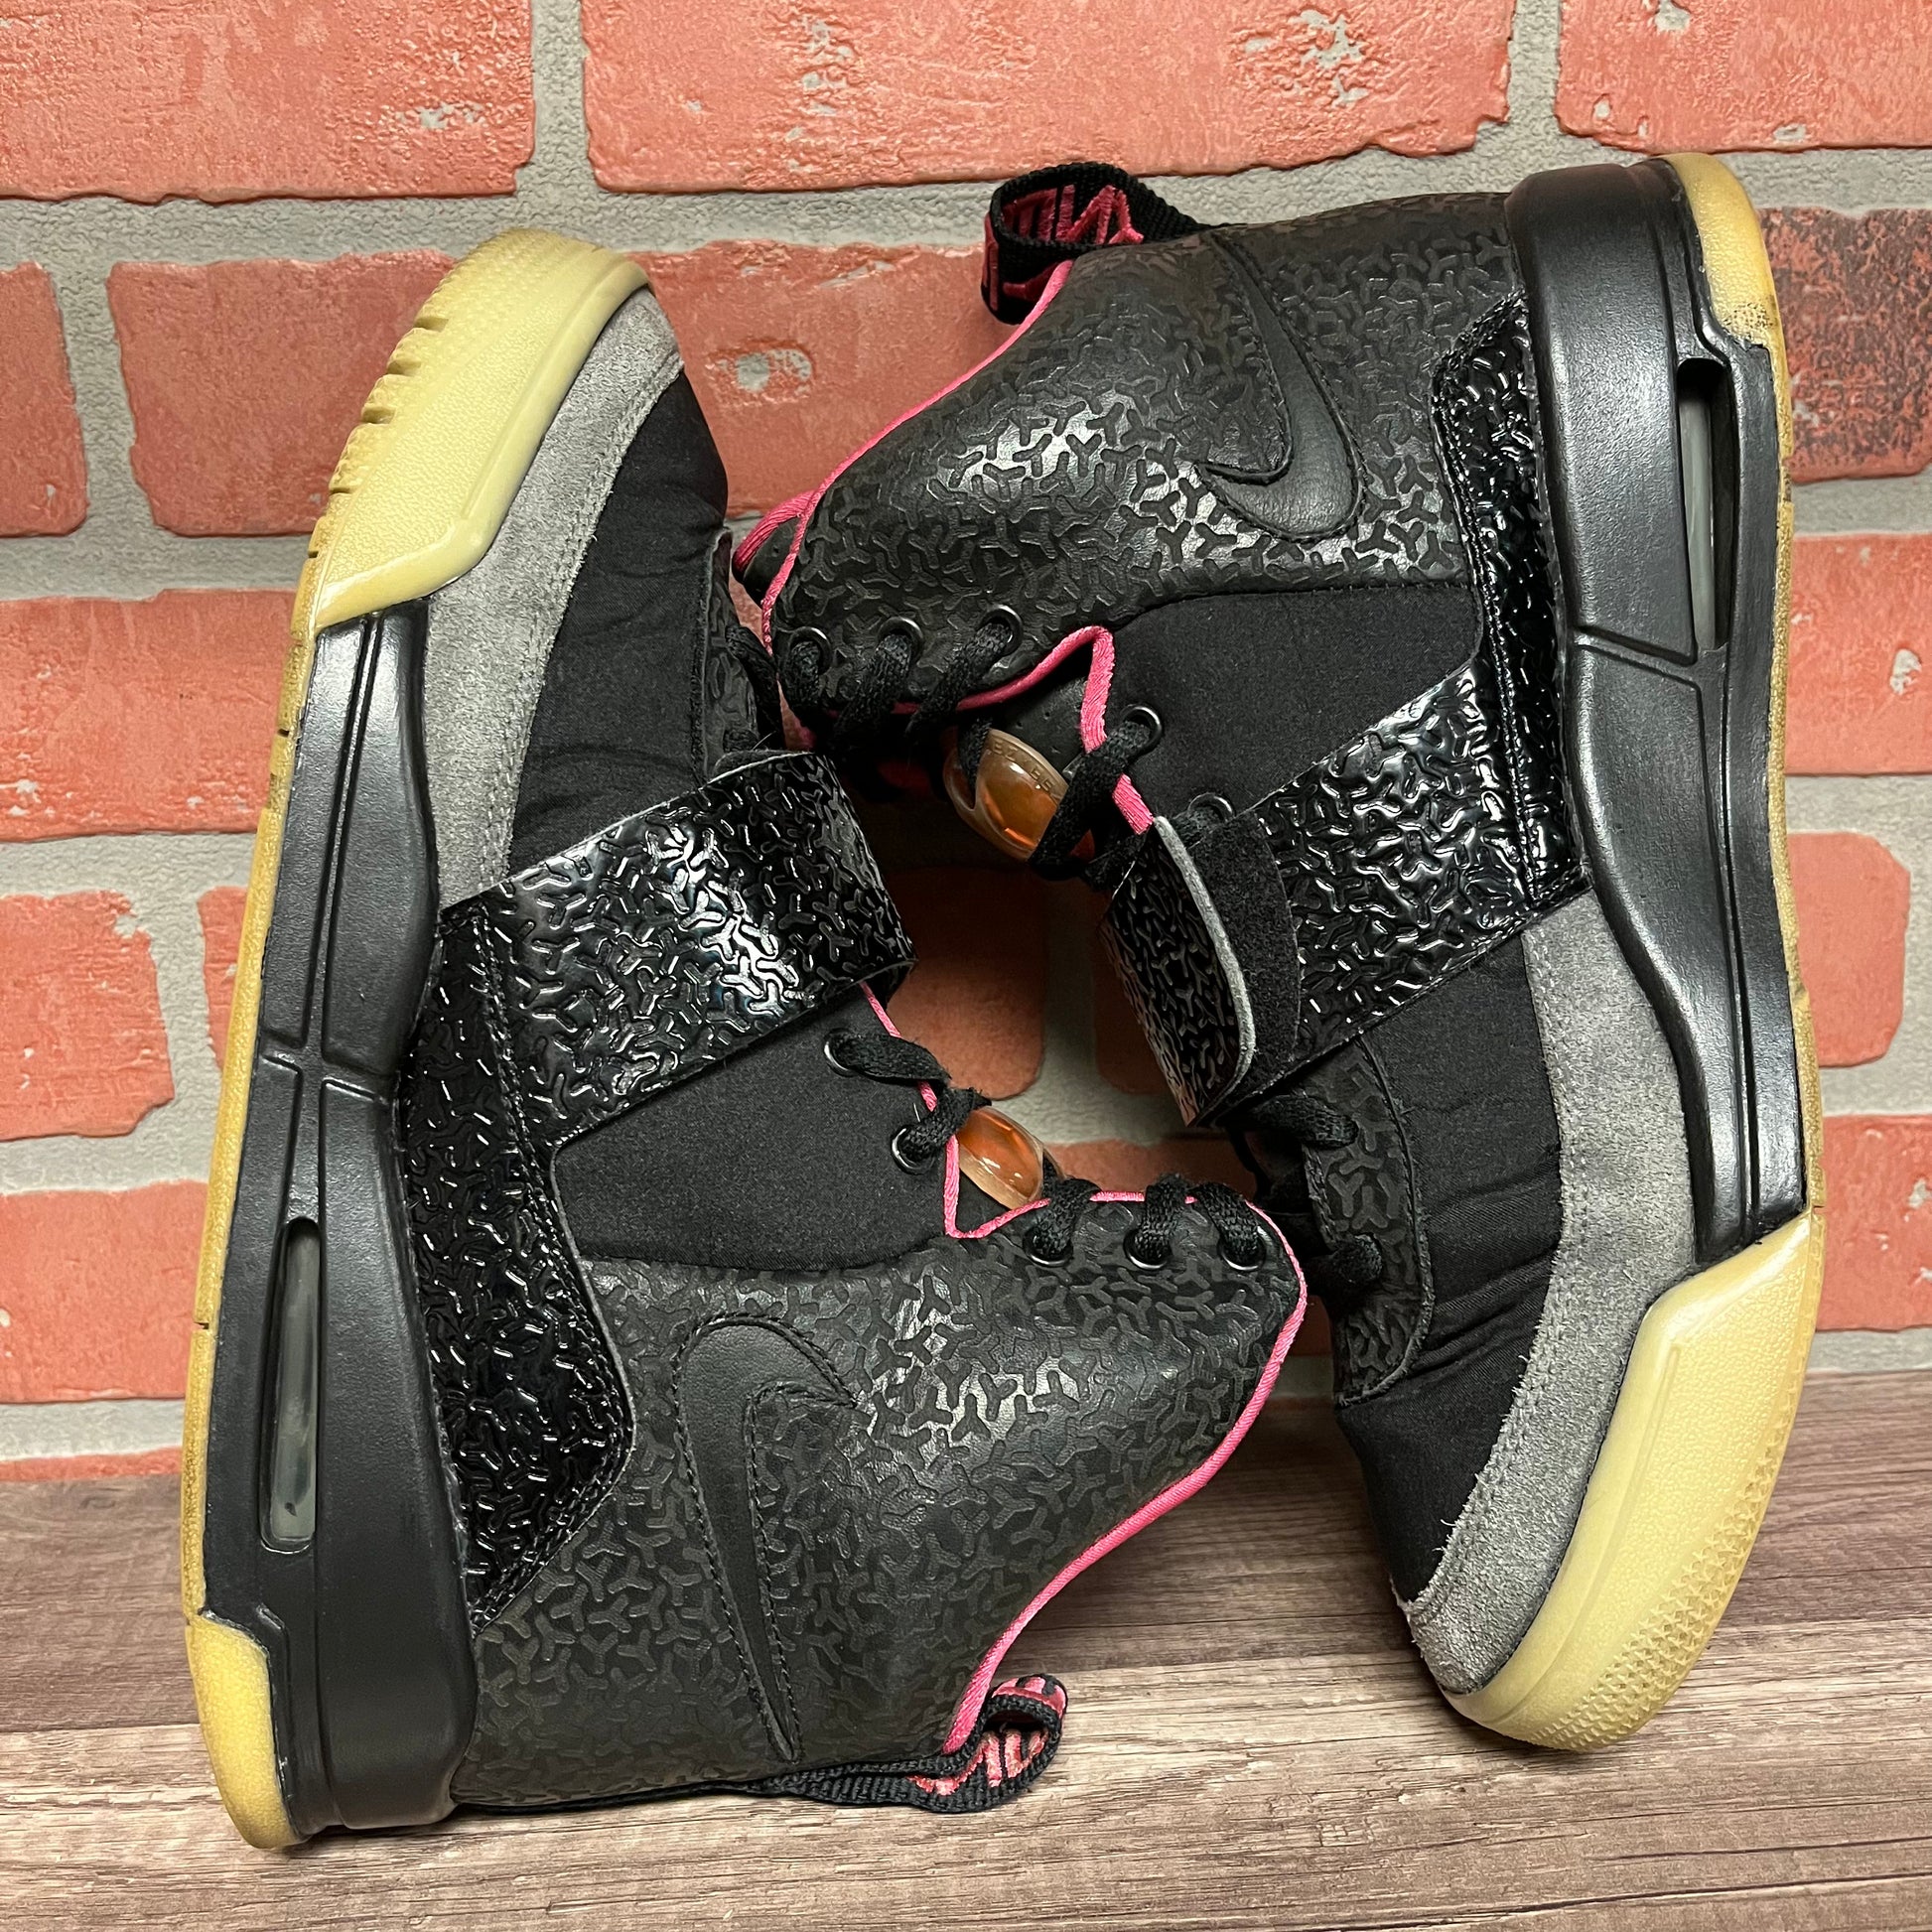 WOW! NIKE AIR YEEZY BLINK 1 EXTREMELY RARE!!!!